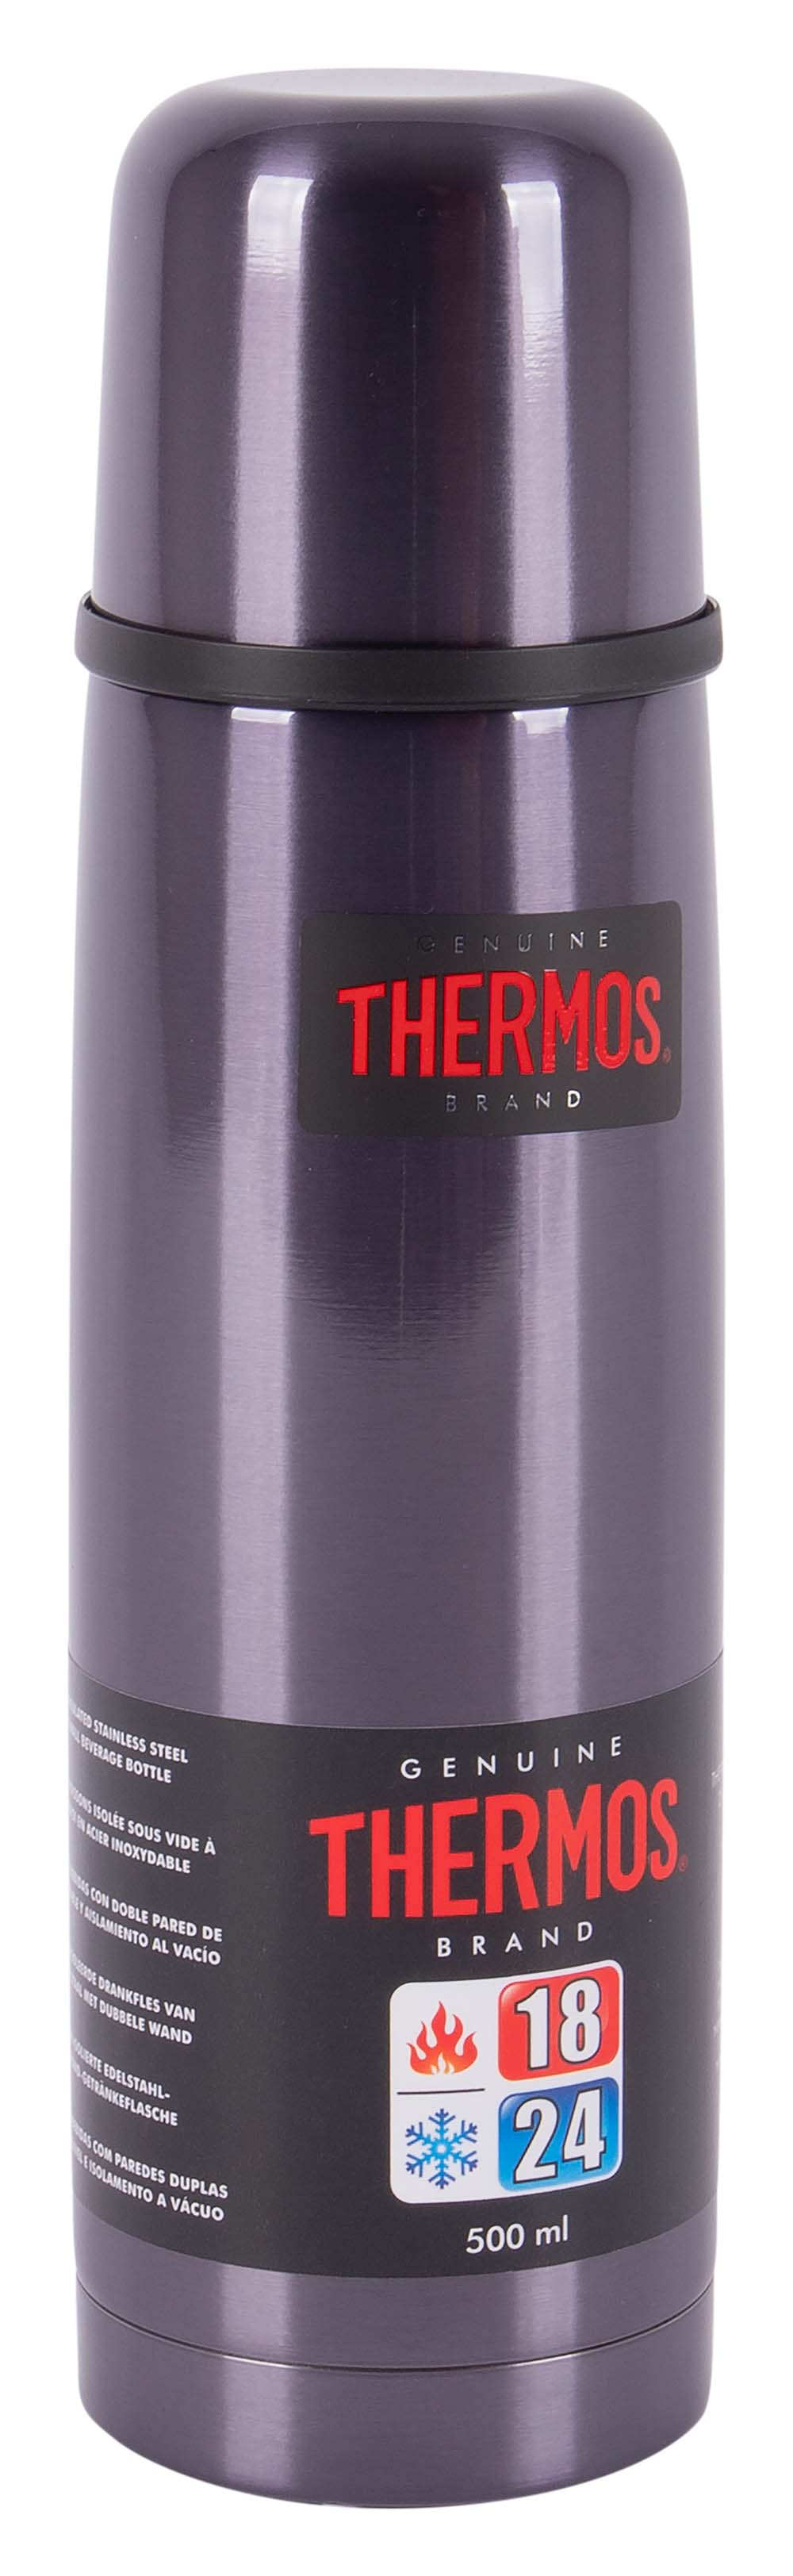 7398061 A high-quality and lightweight thermos flask. The high-quality vacuum insulation technology by Thermax® ensures maximum preservation of cold or hot temperatures and maintains the contents on temperature up to 3 times longer than comparable thermos flasks! Special lightweight stainless steel, copper plated for optimum insulation and also 20% lighter. The special construction renders it virtually unbreakable and dent resistant! So the insulation hardly diminishes, even after intensive use. In other vacuum flasks, a dent causes an immediate reduction of the insulation. With a cap that doubles as a drinking cup with a practical push-button underneath. Comes with a 5 year guarantee!